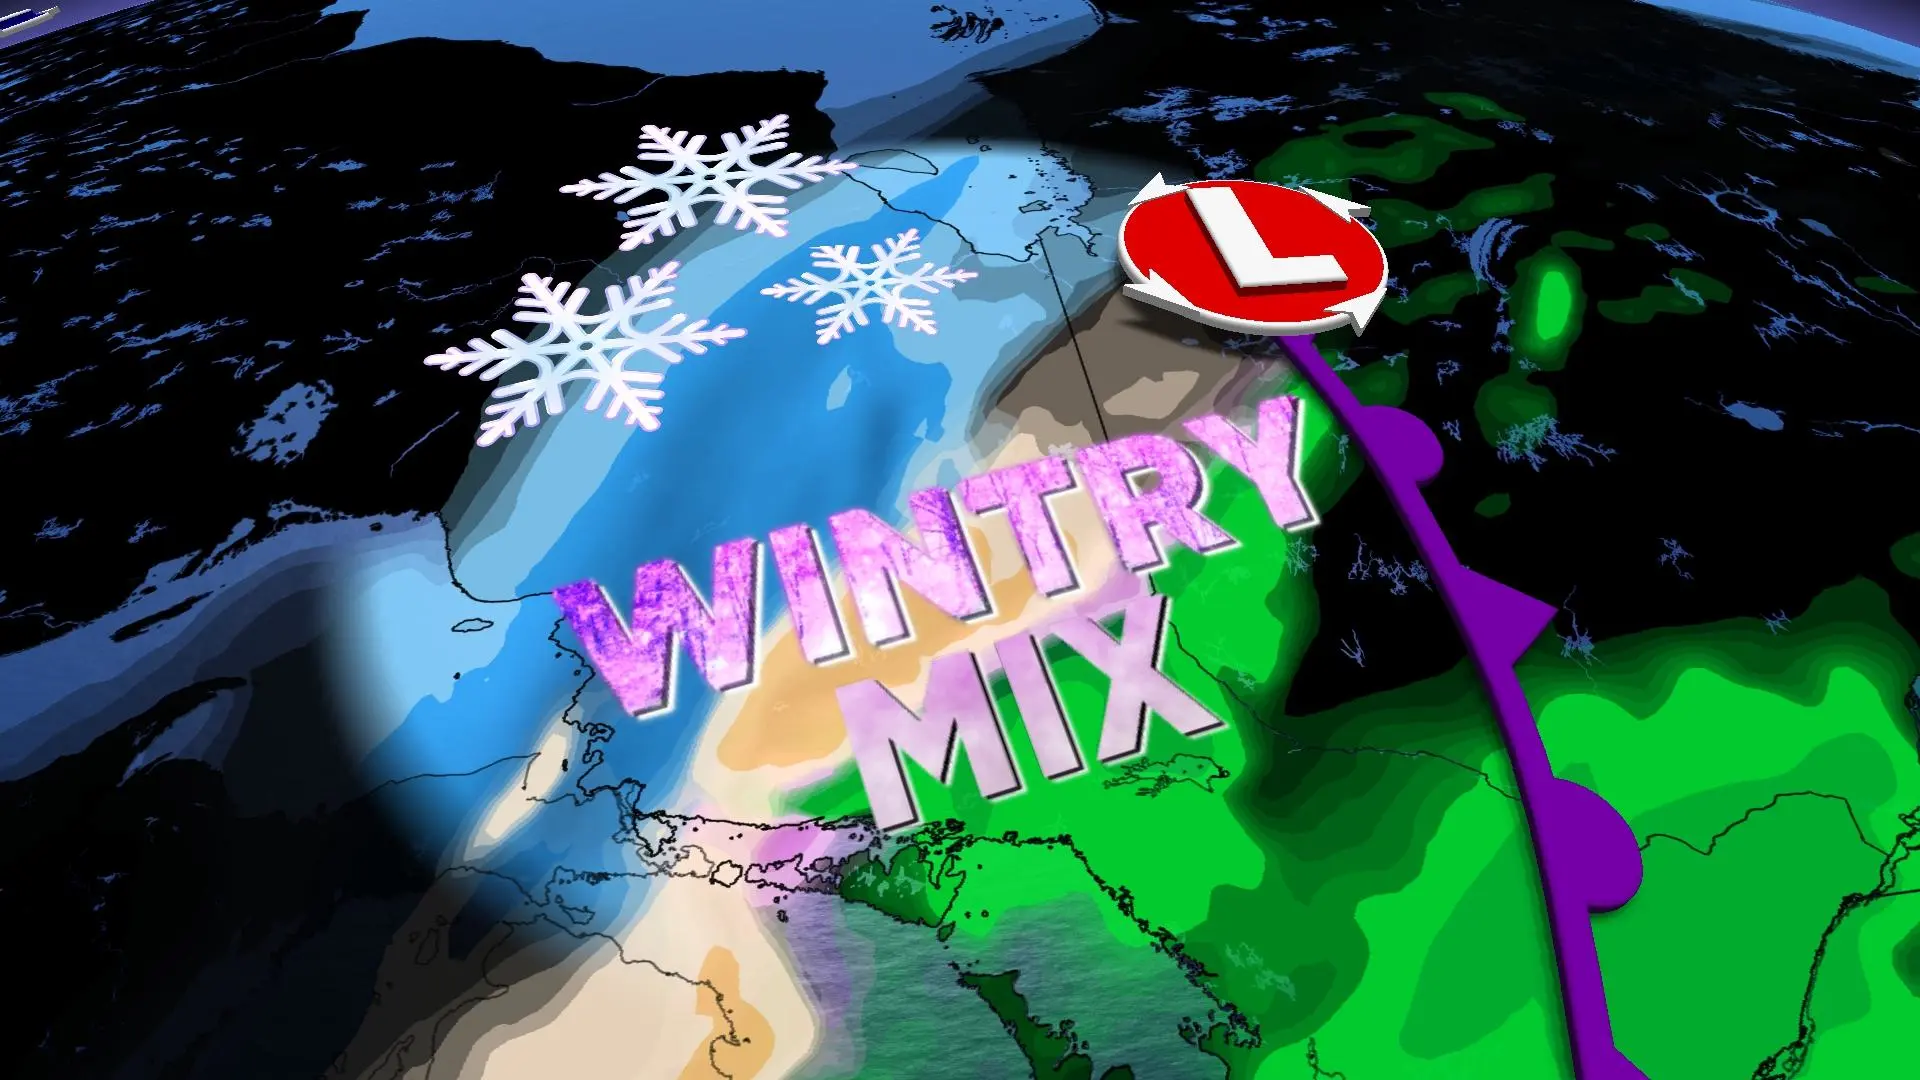 Wintry system will quickly erase hopes of early spring in northern Ontario